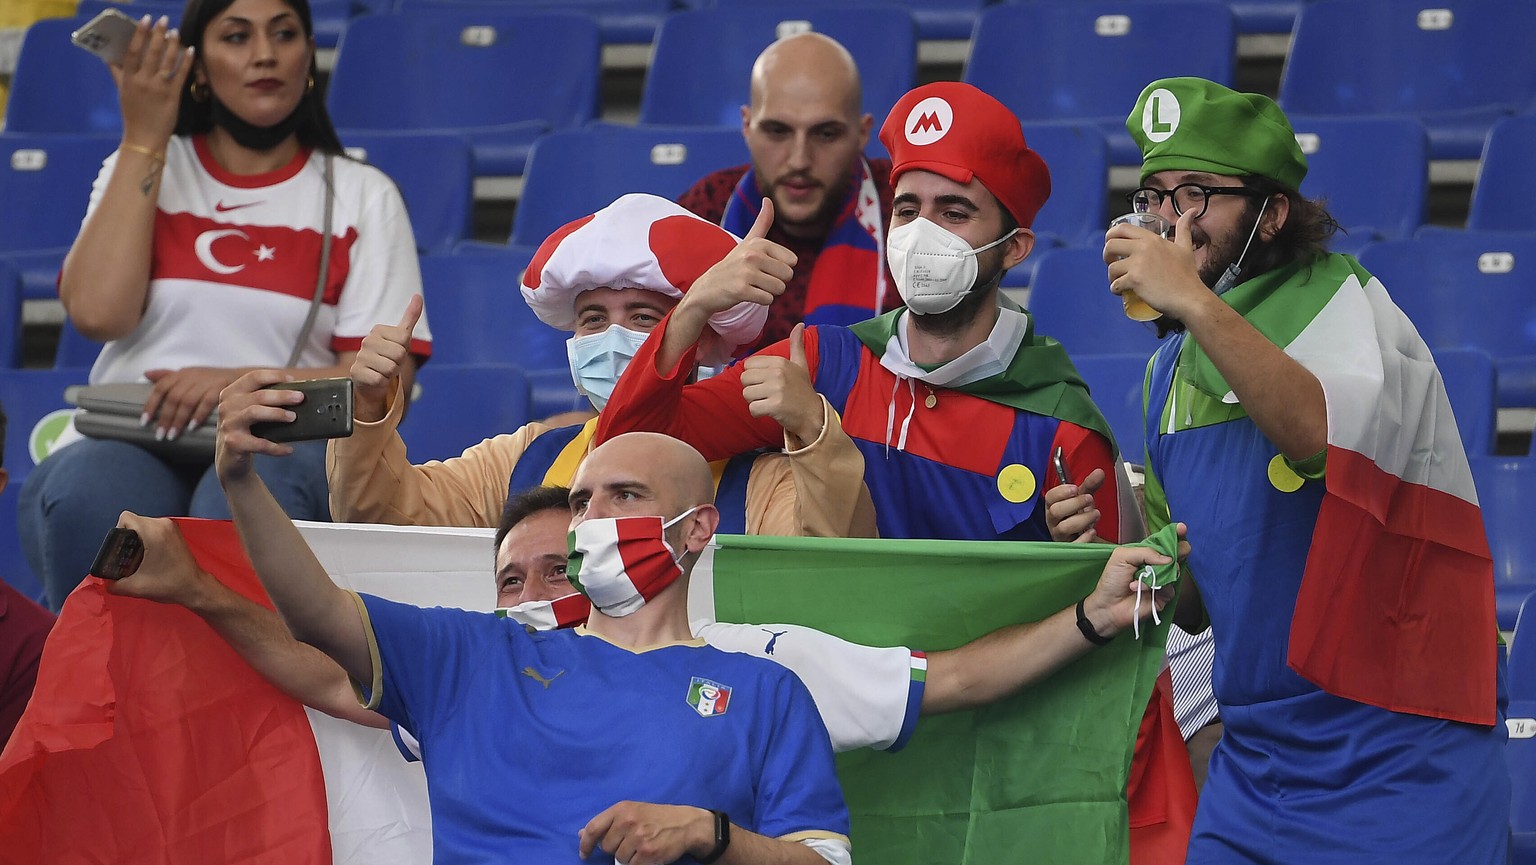 Fans take selfies with their phone before the Euro 2020 soccer championship group A match between Turkey and Italy at the Olympic stadium in Rome, Friday, June 11, 2021. (Ettore Ferrari/Pool via AP)